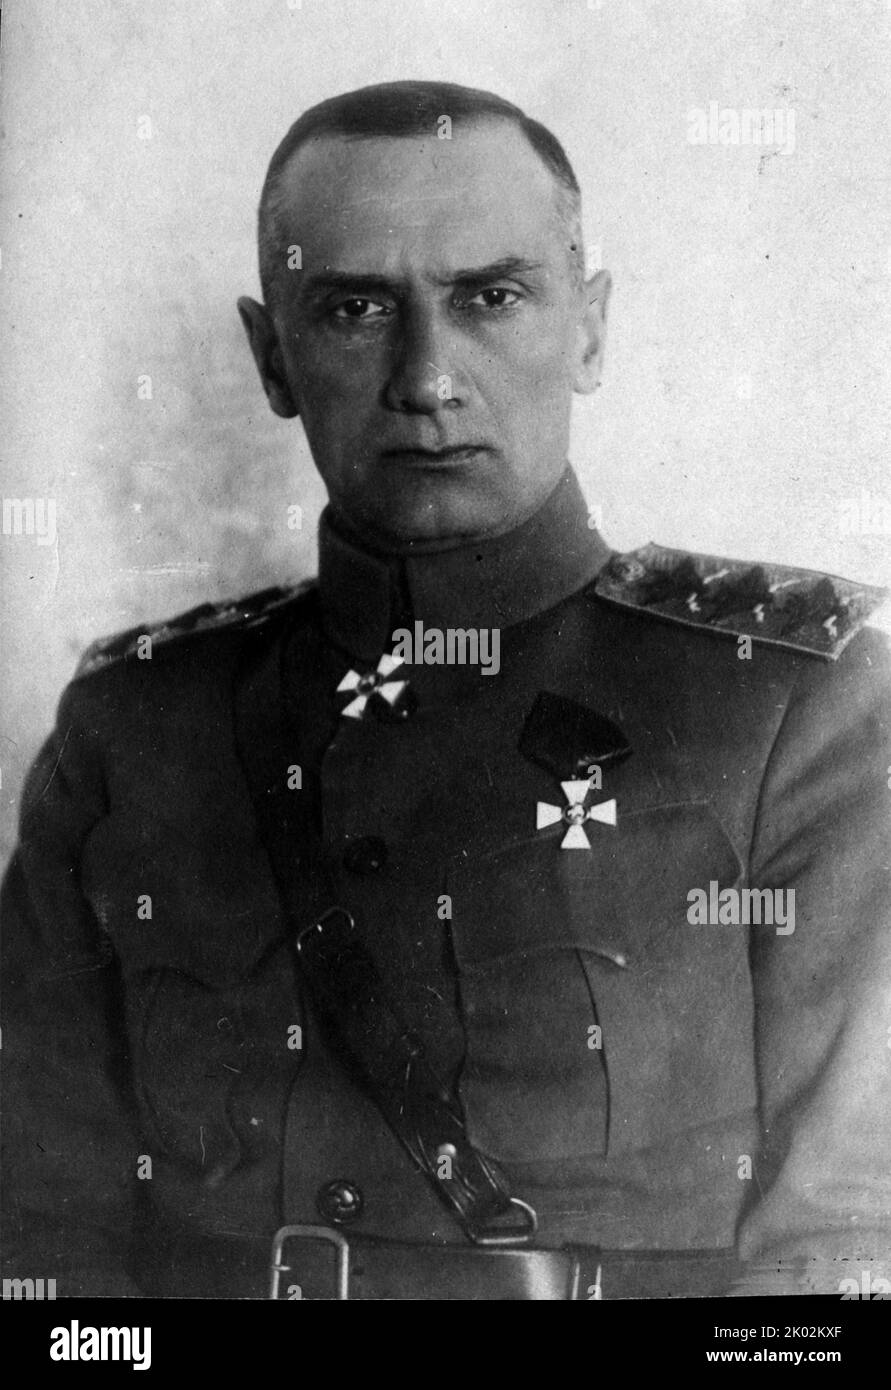 Alexander Vasilyevich Kolchak (1874 - 1920) Imperial Russian admiral, military leader. he established an anti-communist government in Siberia--later the Provisional All-Russian Government--and was recognised as the 'Supreme Leader and Commander-in-Chief of All Russian Land and Sea Forces' by the other leaders of the White movement from 1918 to 1920 Stock Photo